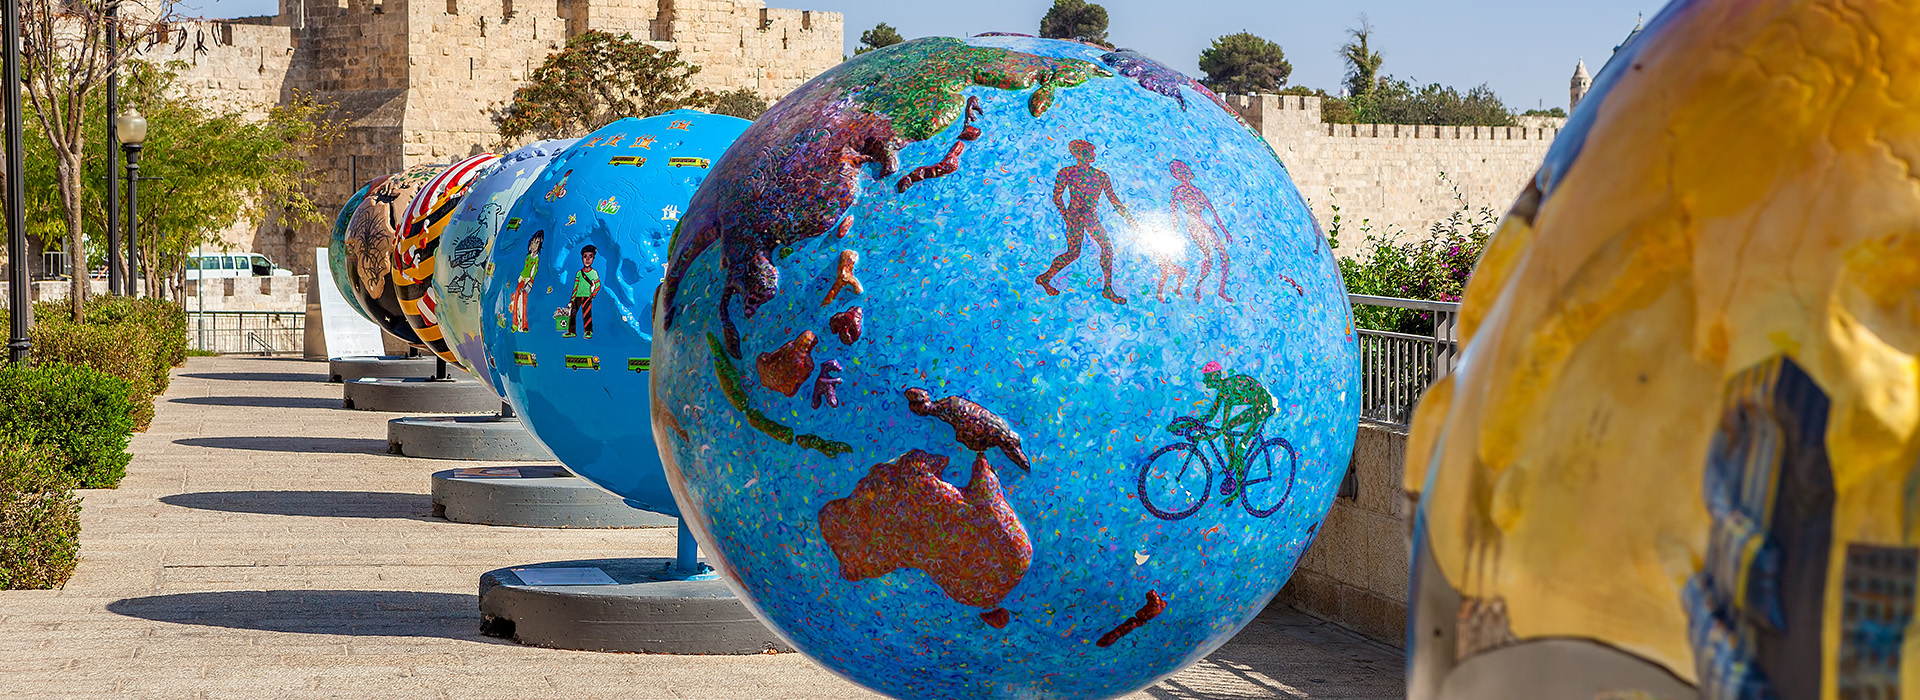 As part of the public art exhibition "Cool Globes" in the Old City of Jerusalem, various statues of globes are exhibited.